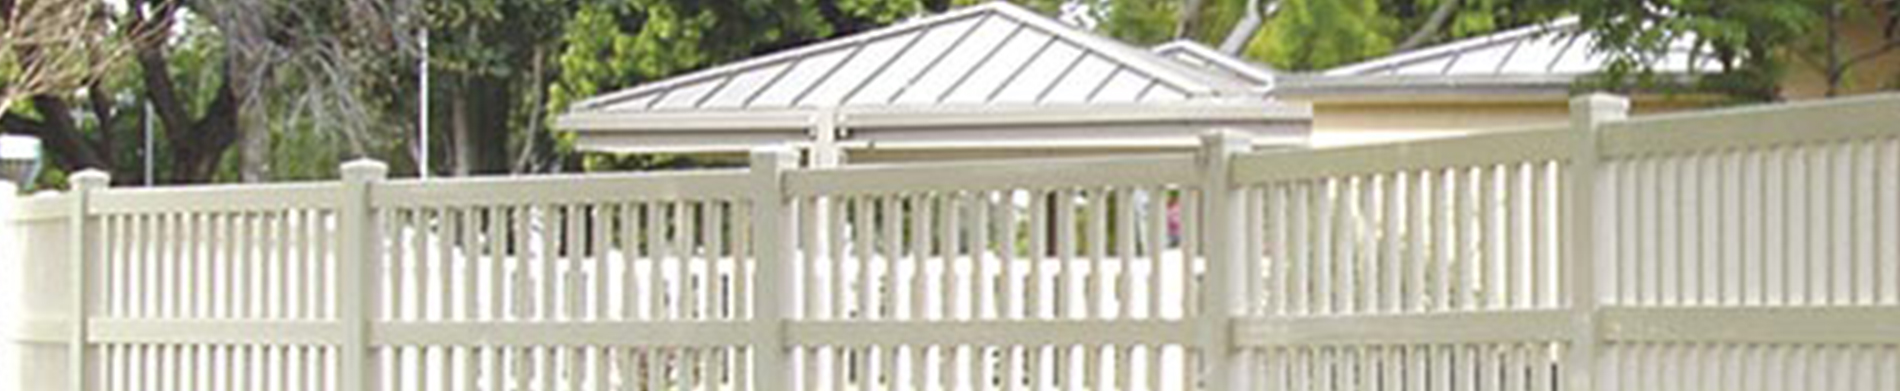 Are You Planning to Vinyl Fence? Here’s a Guide to Finding the Right Supplier